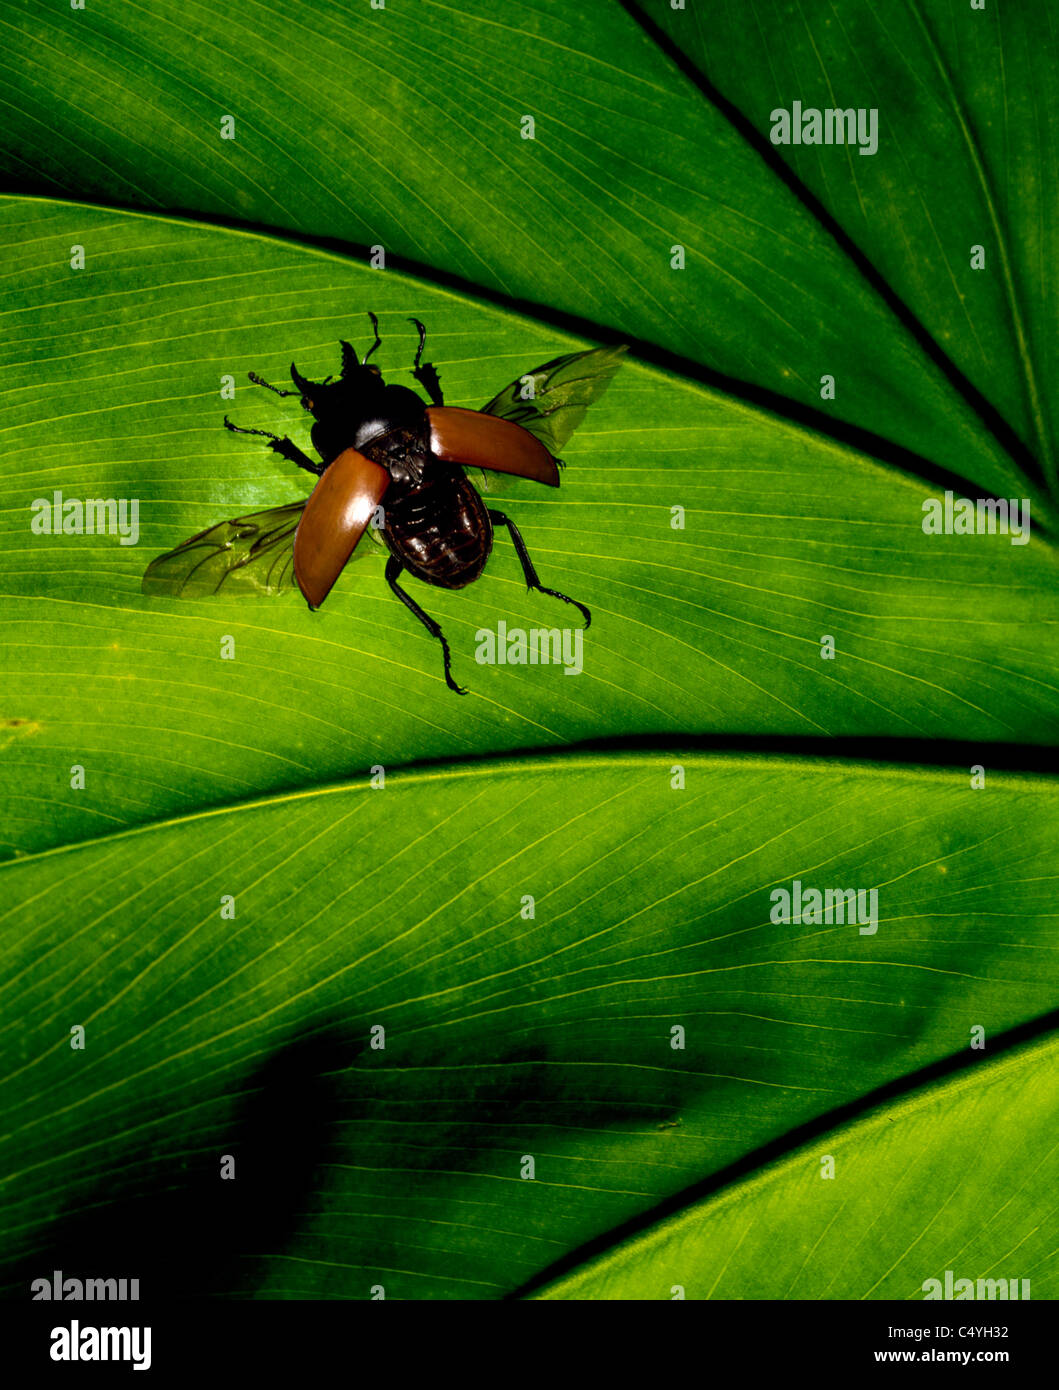 A tropical beetle bug on a bright green leaf Stock Photo